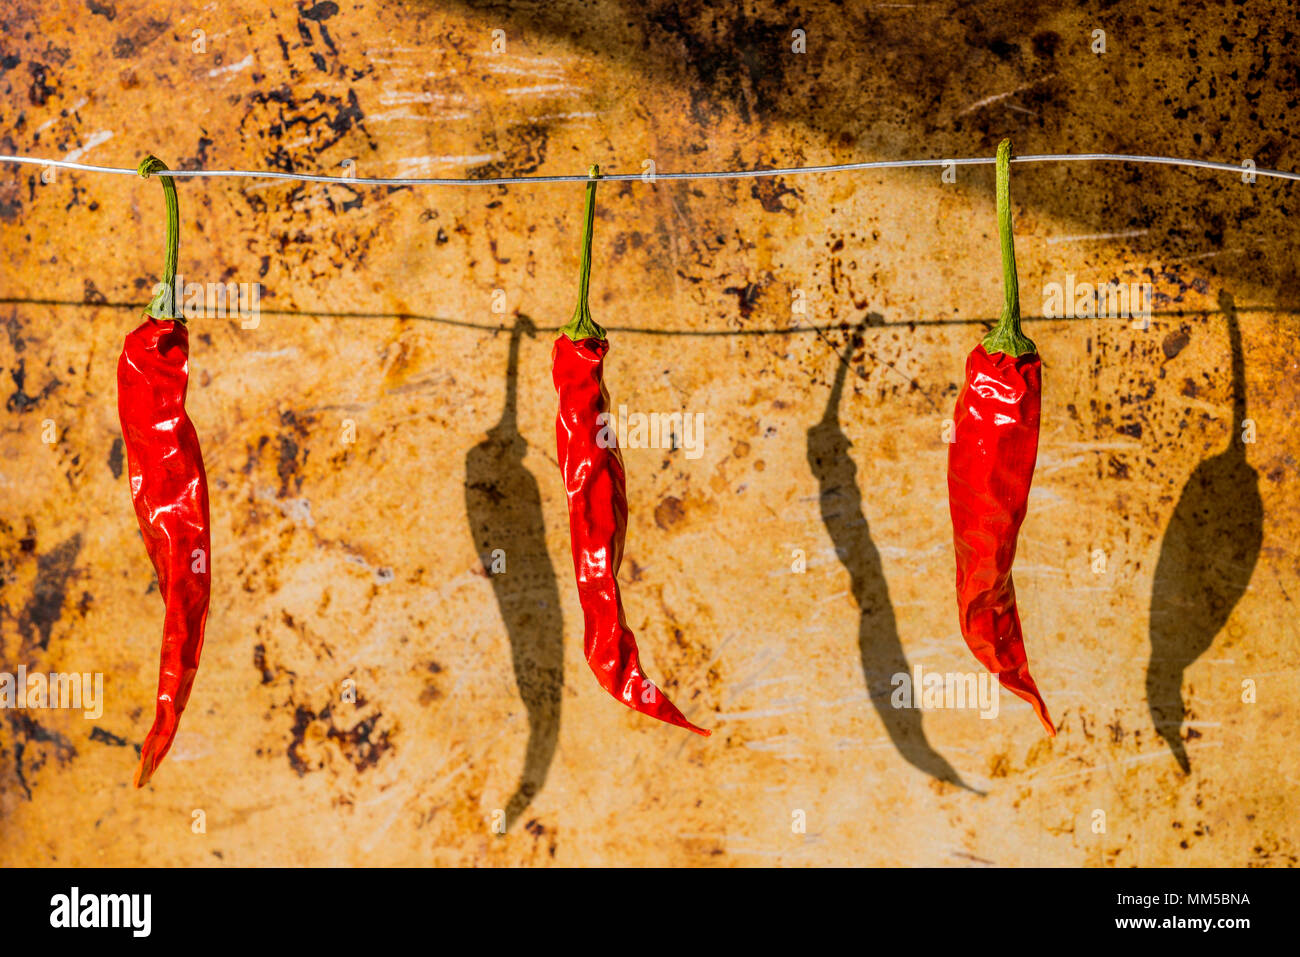 Dried red chili peppers Stock Photo